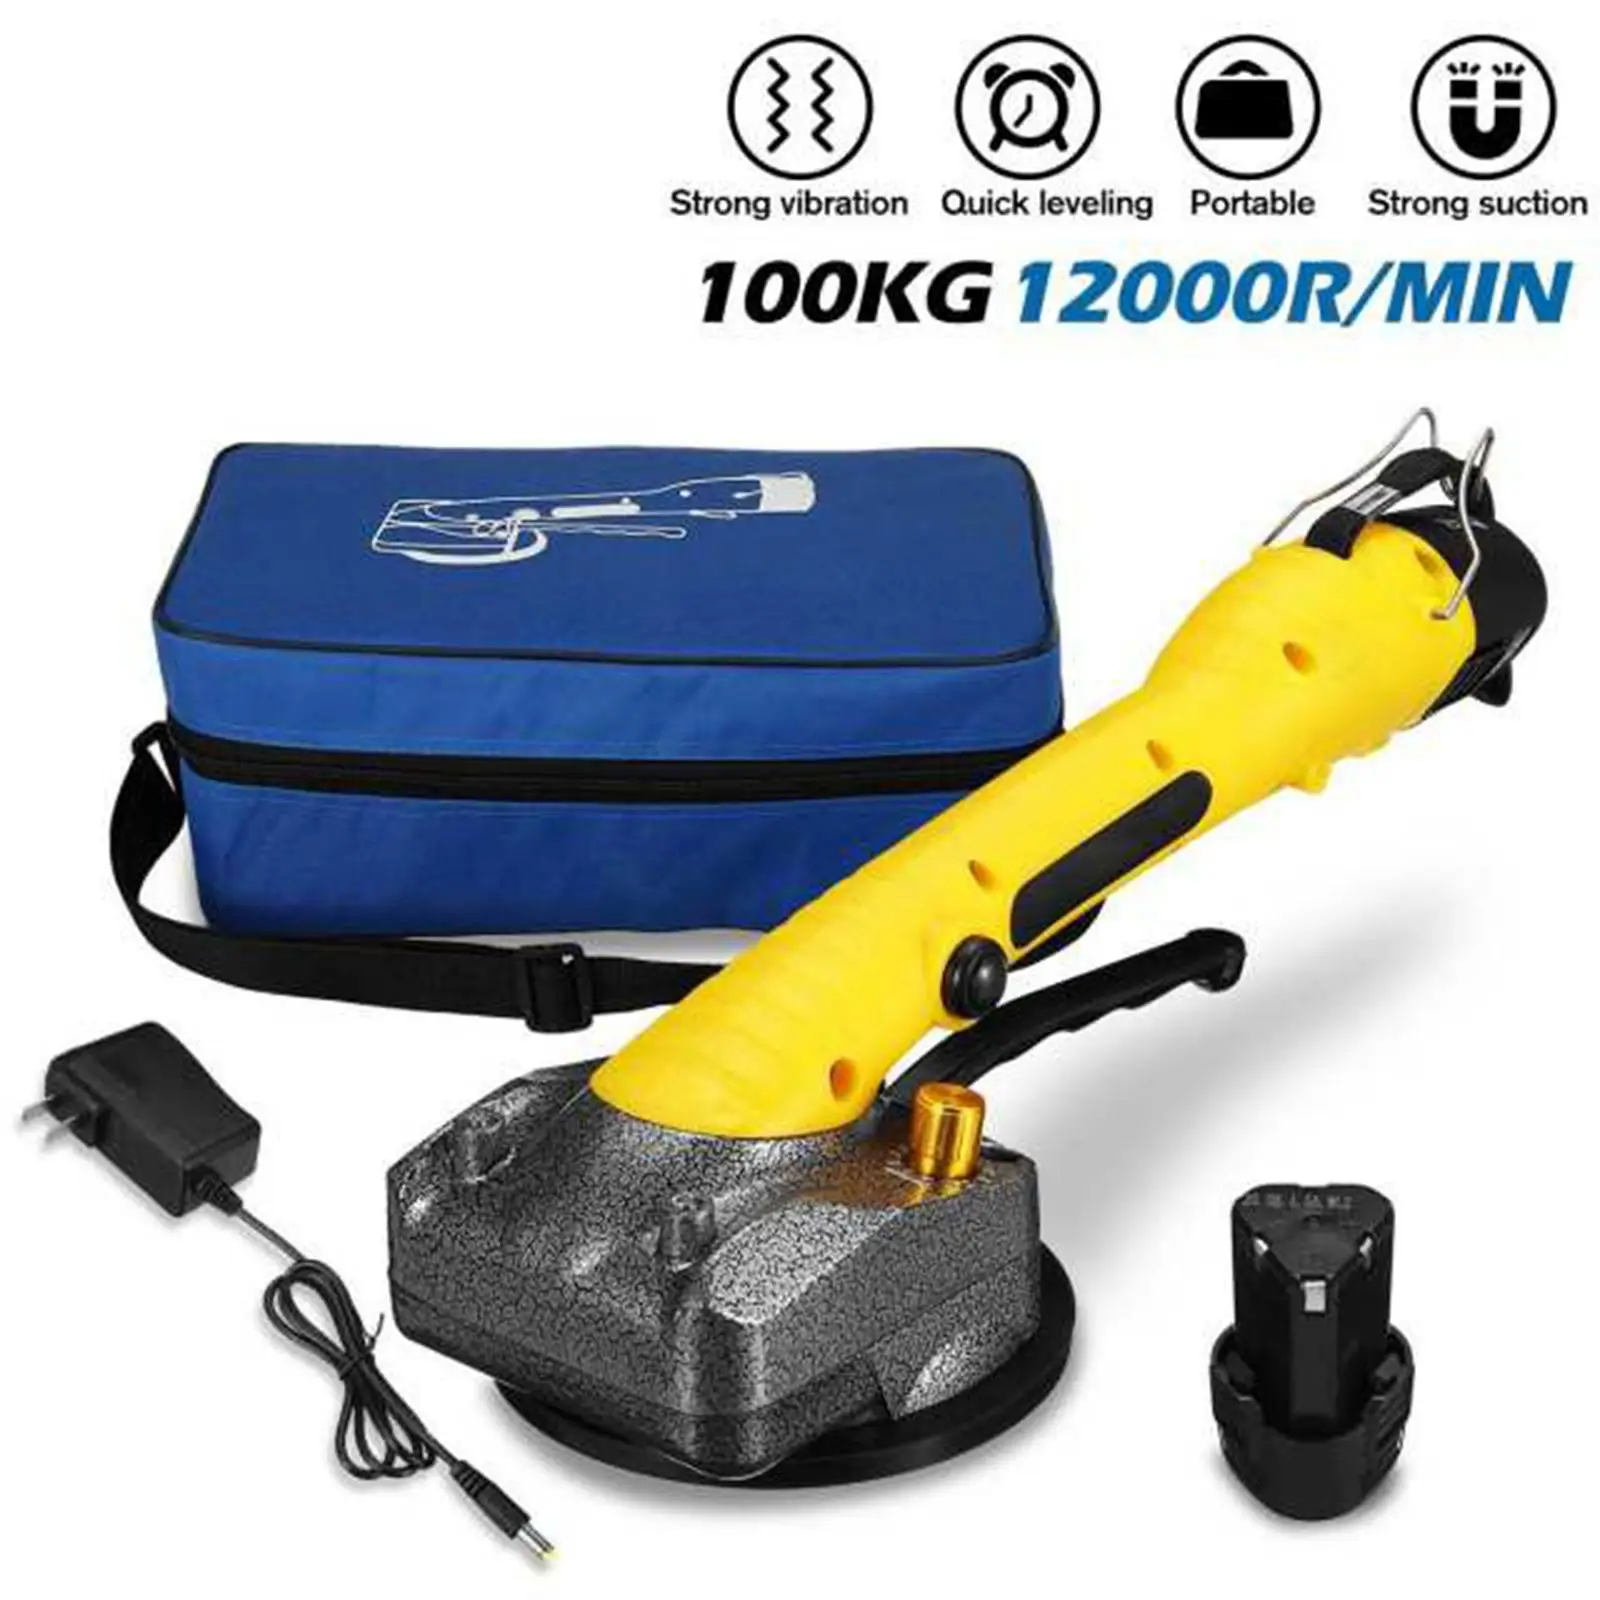 Tile Tiling Machine 2000W Electric Tile Vibration Machine for Floor Tiles and Wall Tiles